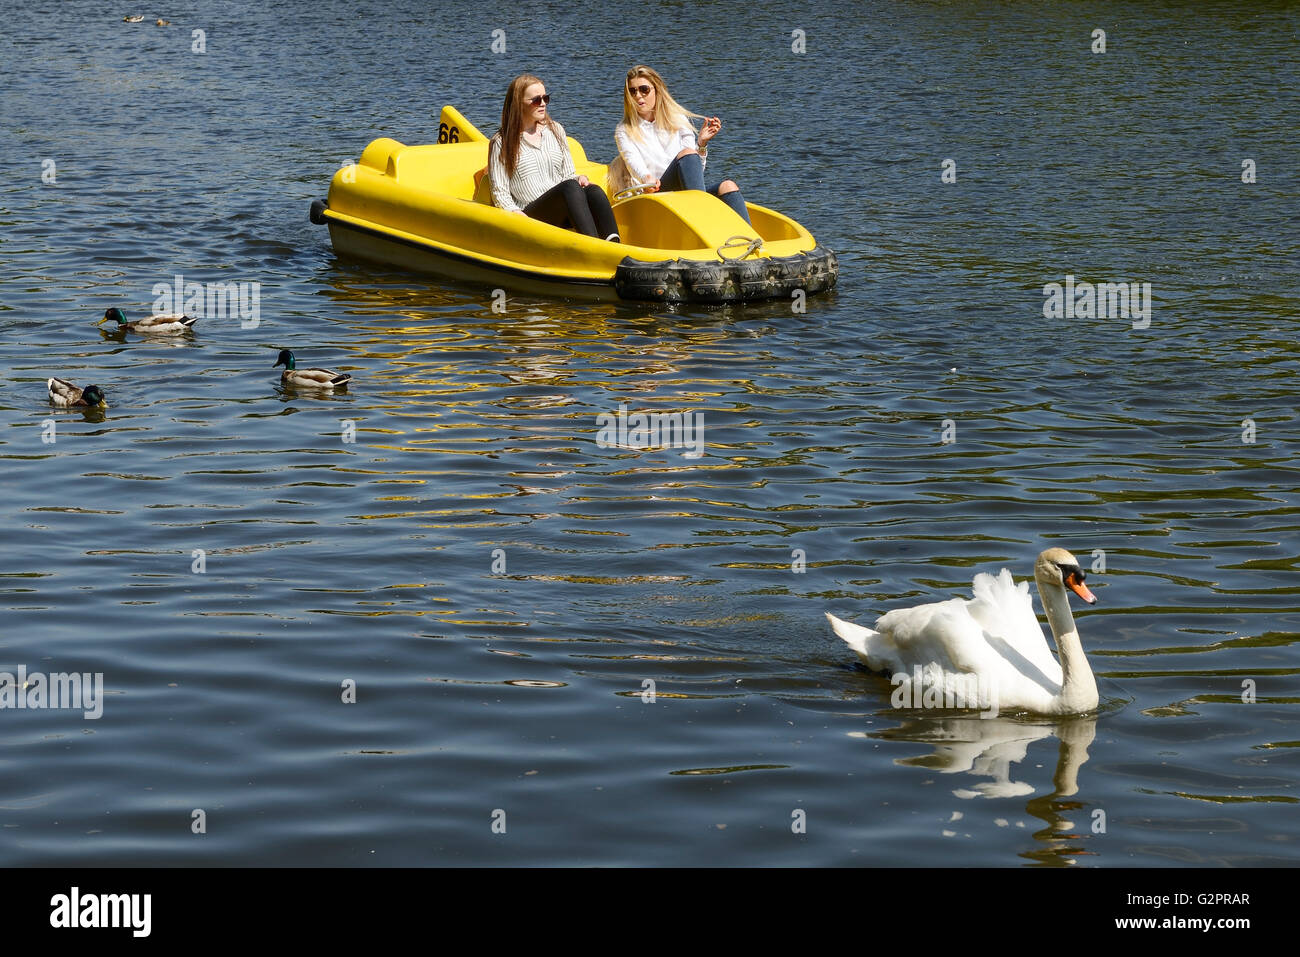 The Groves, Chester, UK. 2nd June 2016. People enjoying the sunny weather on the River Dee at The Groves in Chester city centre. Andrew Paterson/Alamy Live News Stock Photo